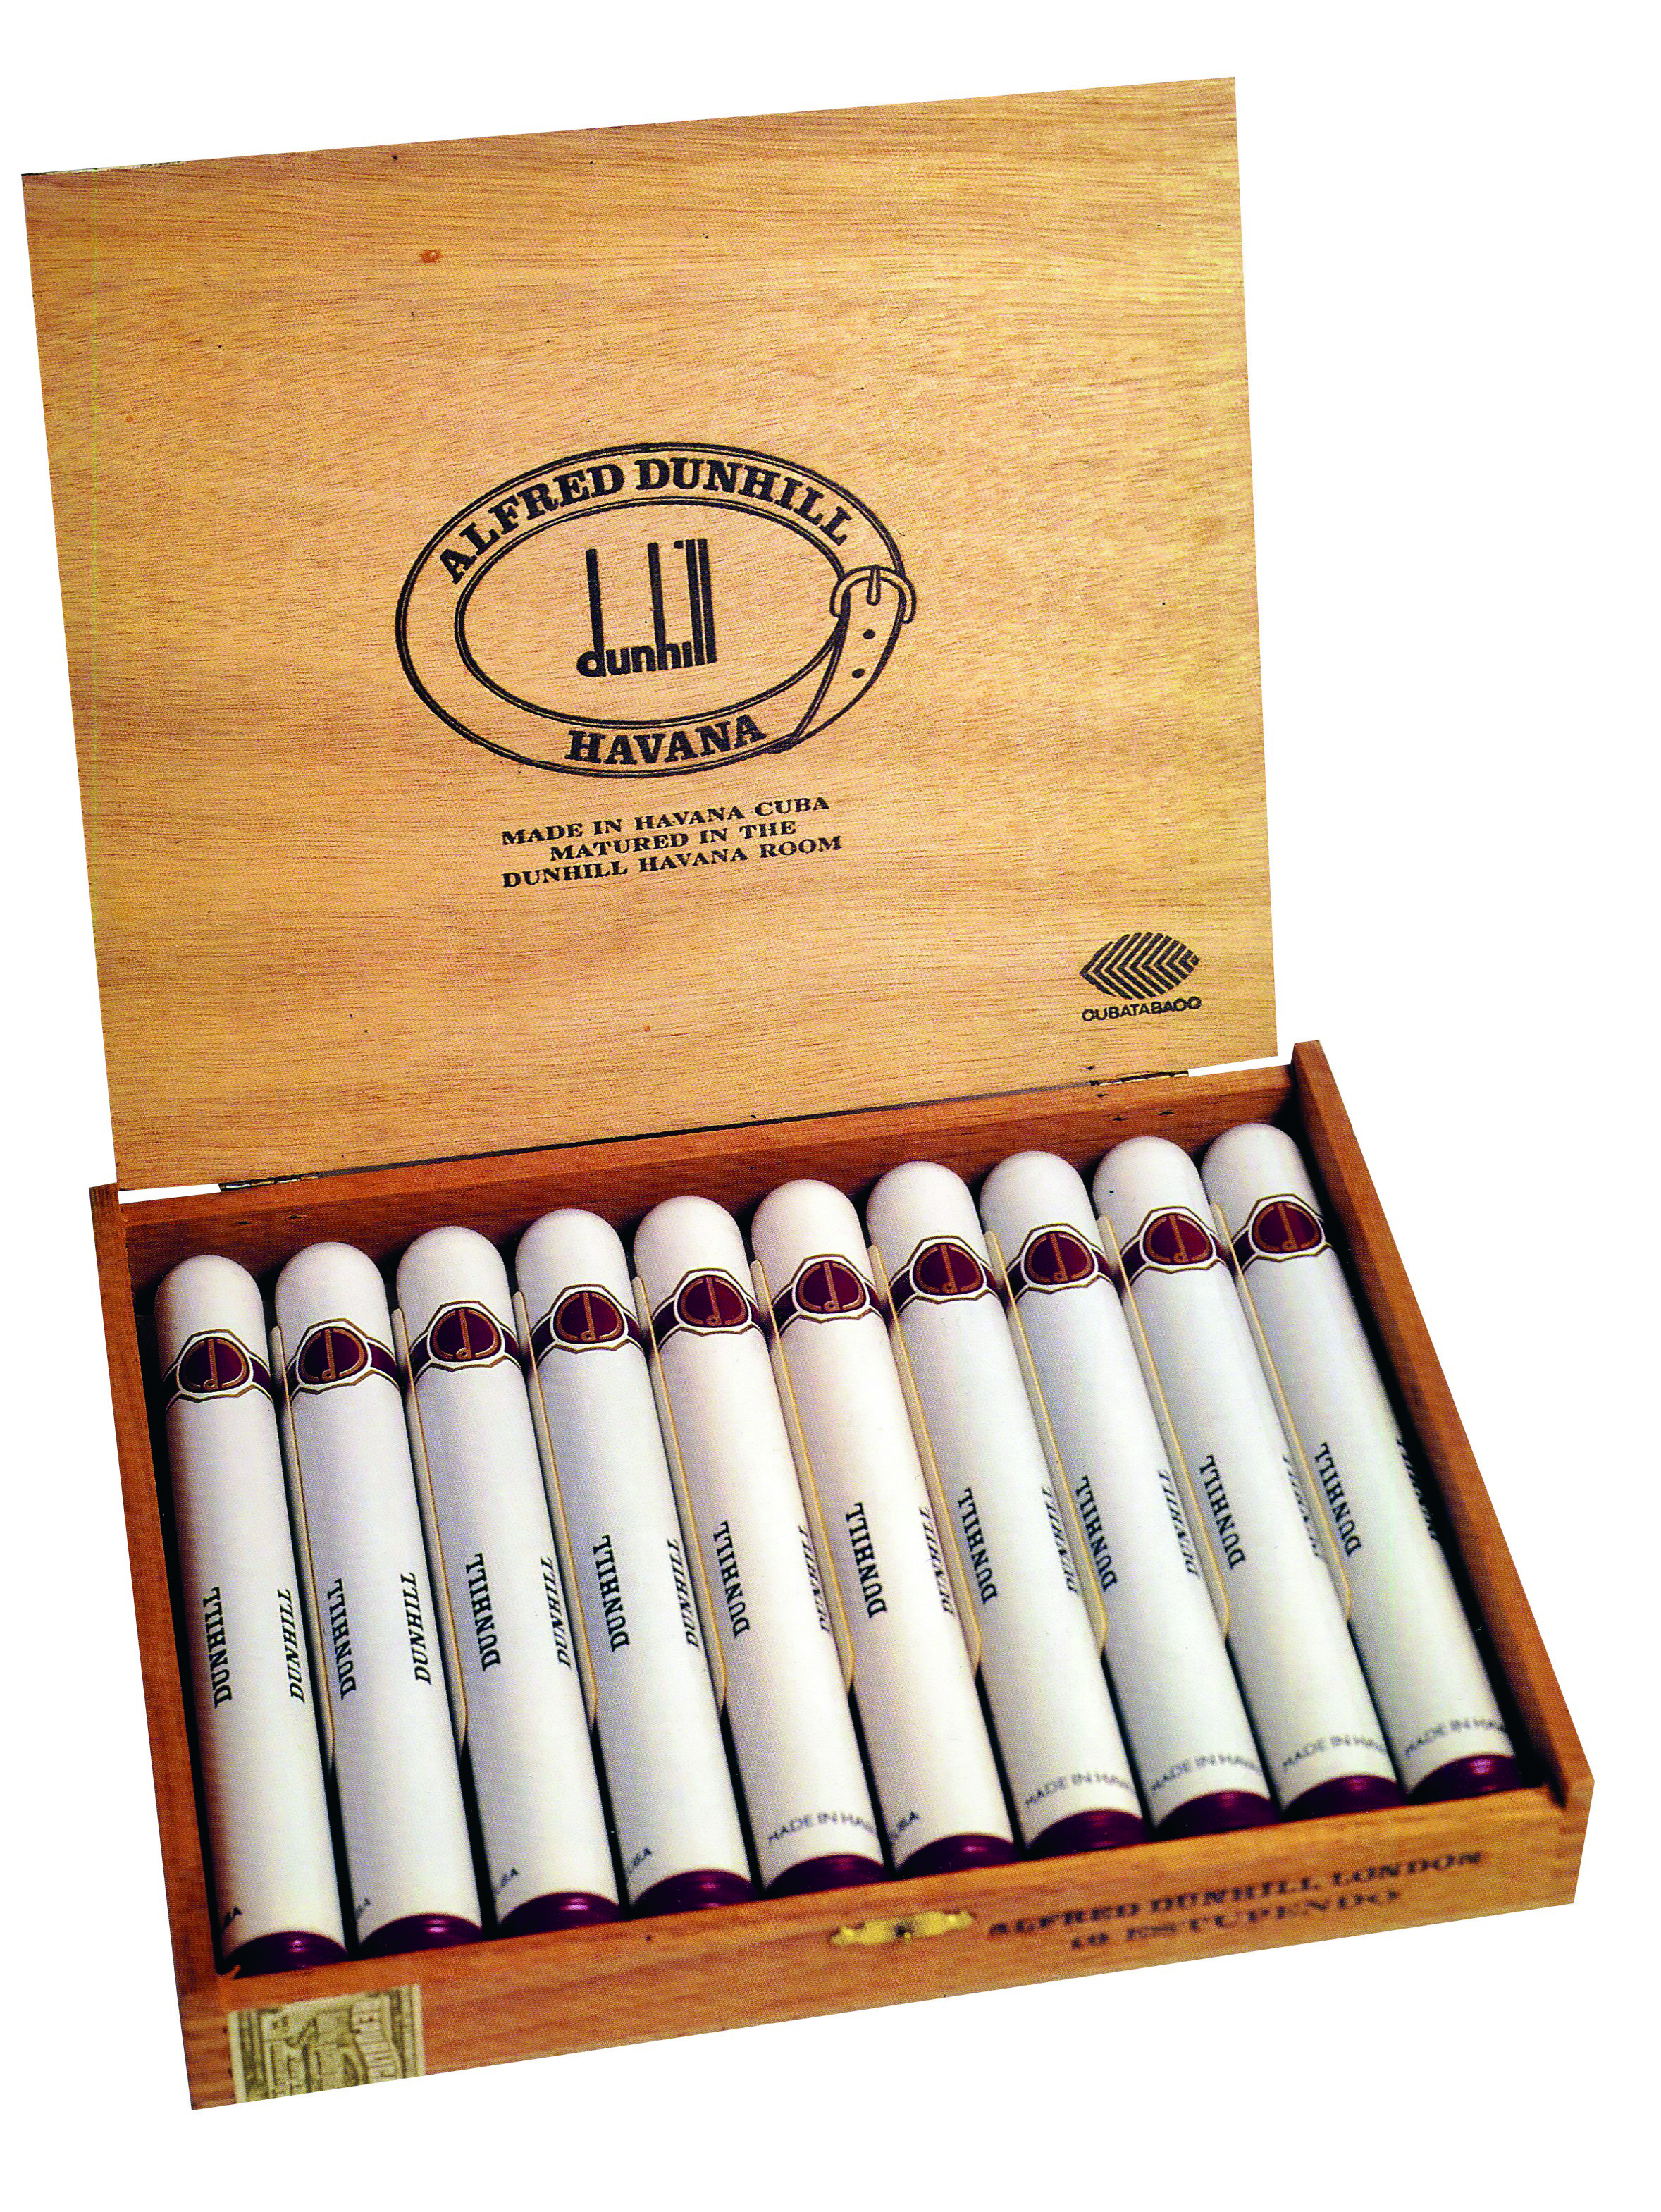 Dunhill, a dying cigar - Cigars Connect